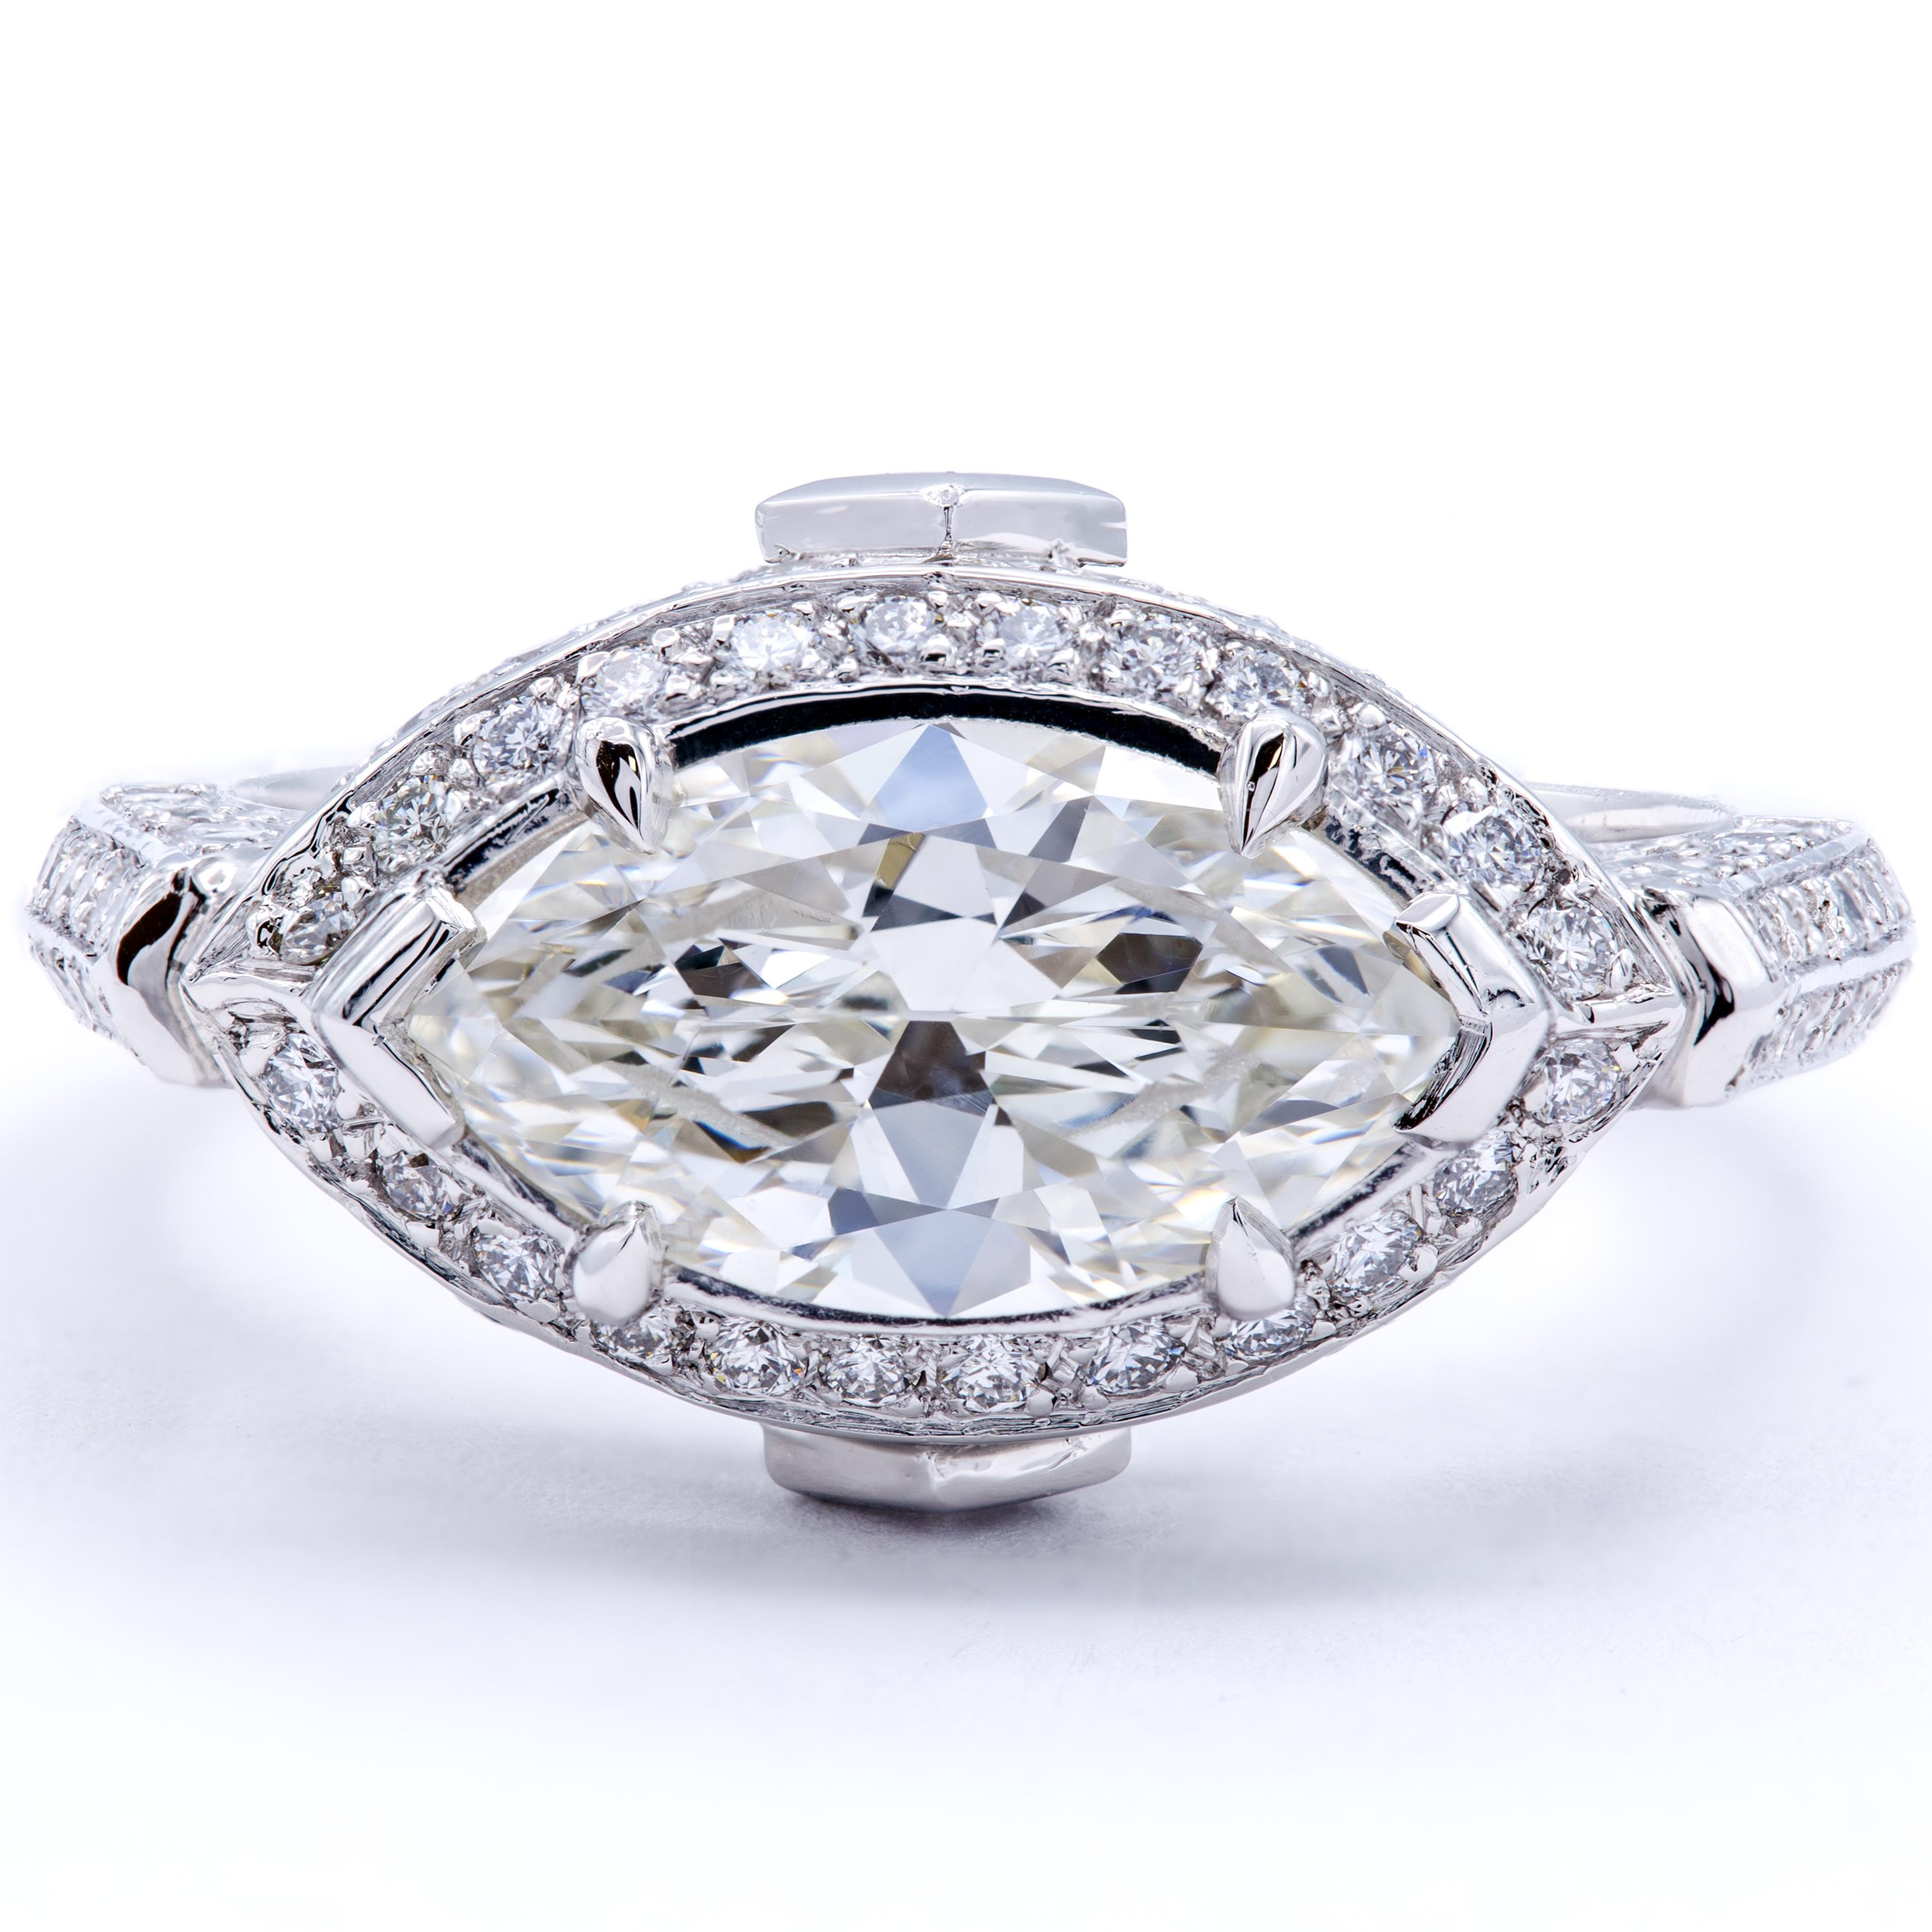 A wonderfully decadent marquise cut diamond rests at the center of this classic engagement ring design from Rosenberg Diamonds & Co. A GIA certified 1.83 carat marquise diamond scintillates with fiery reflections on a band of bright platinum. The